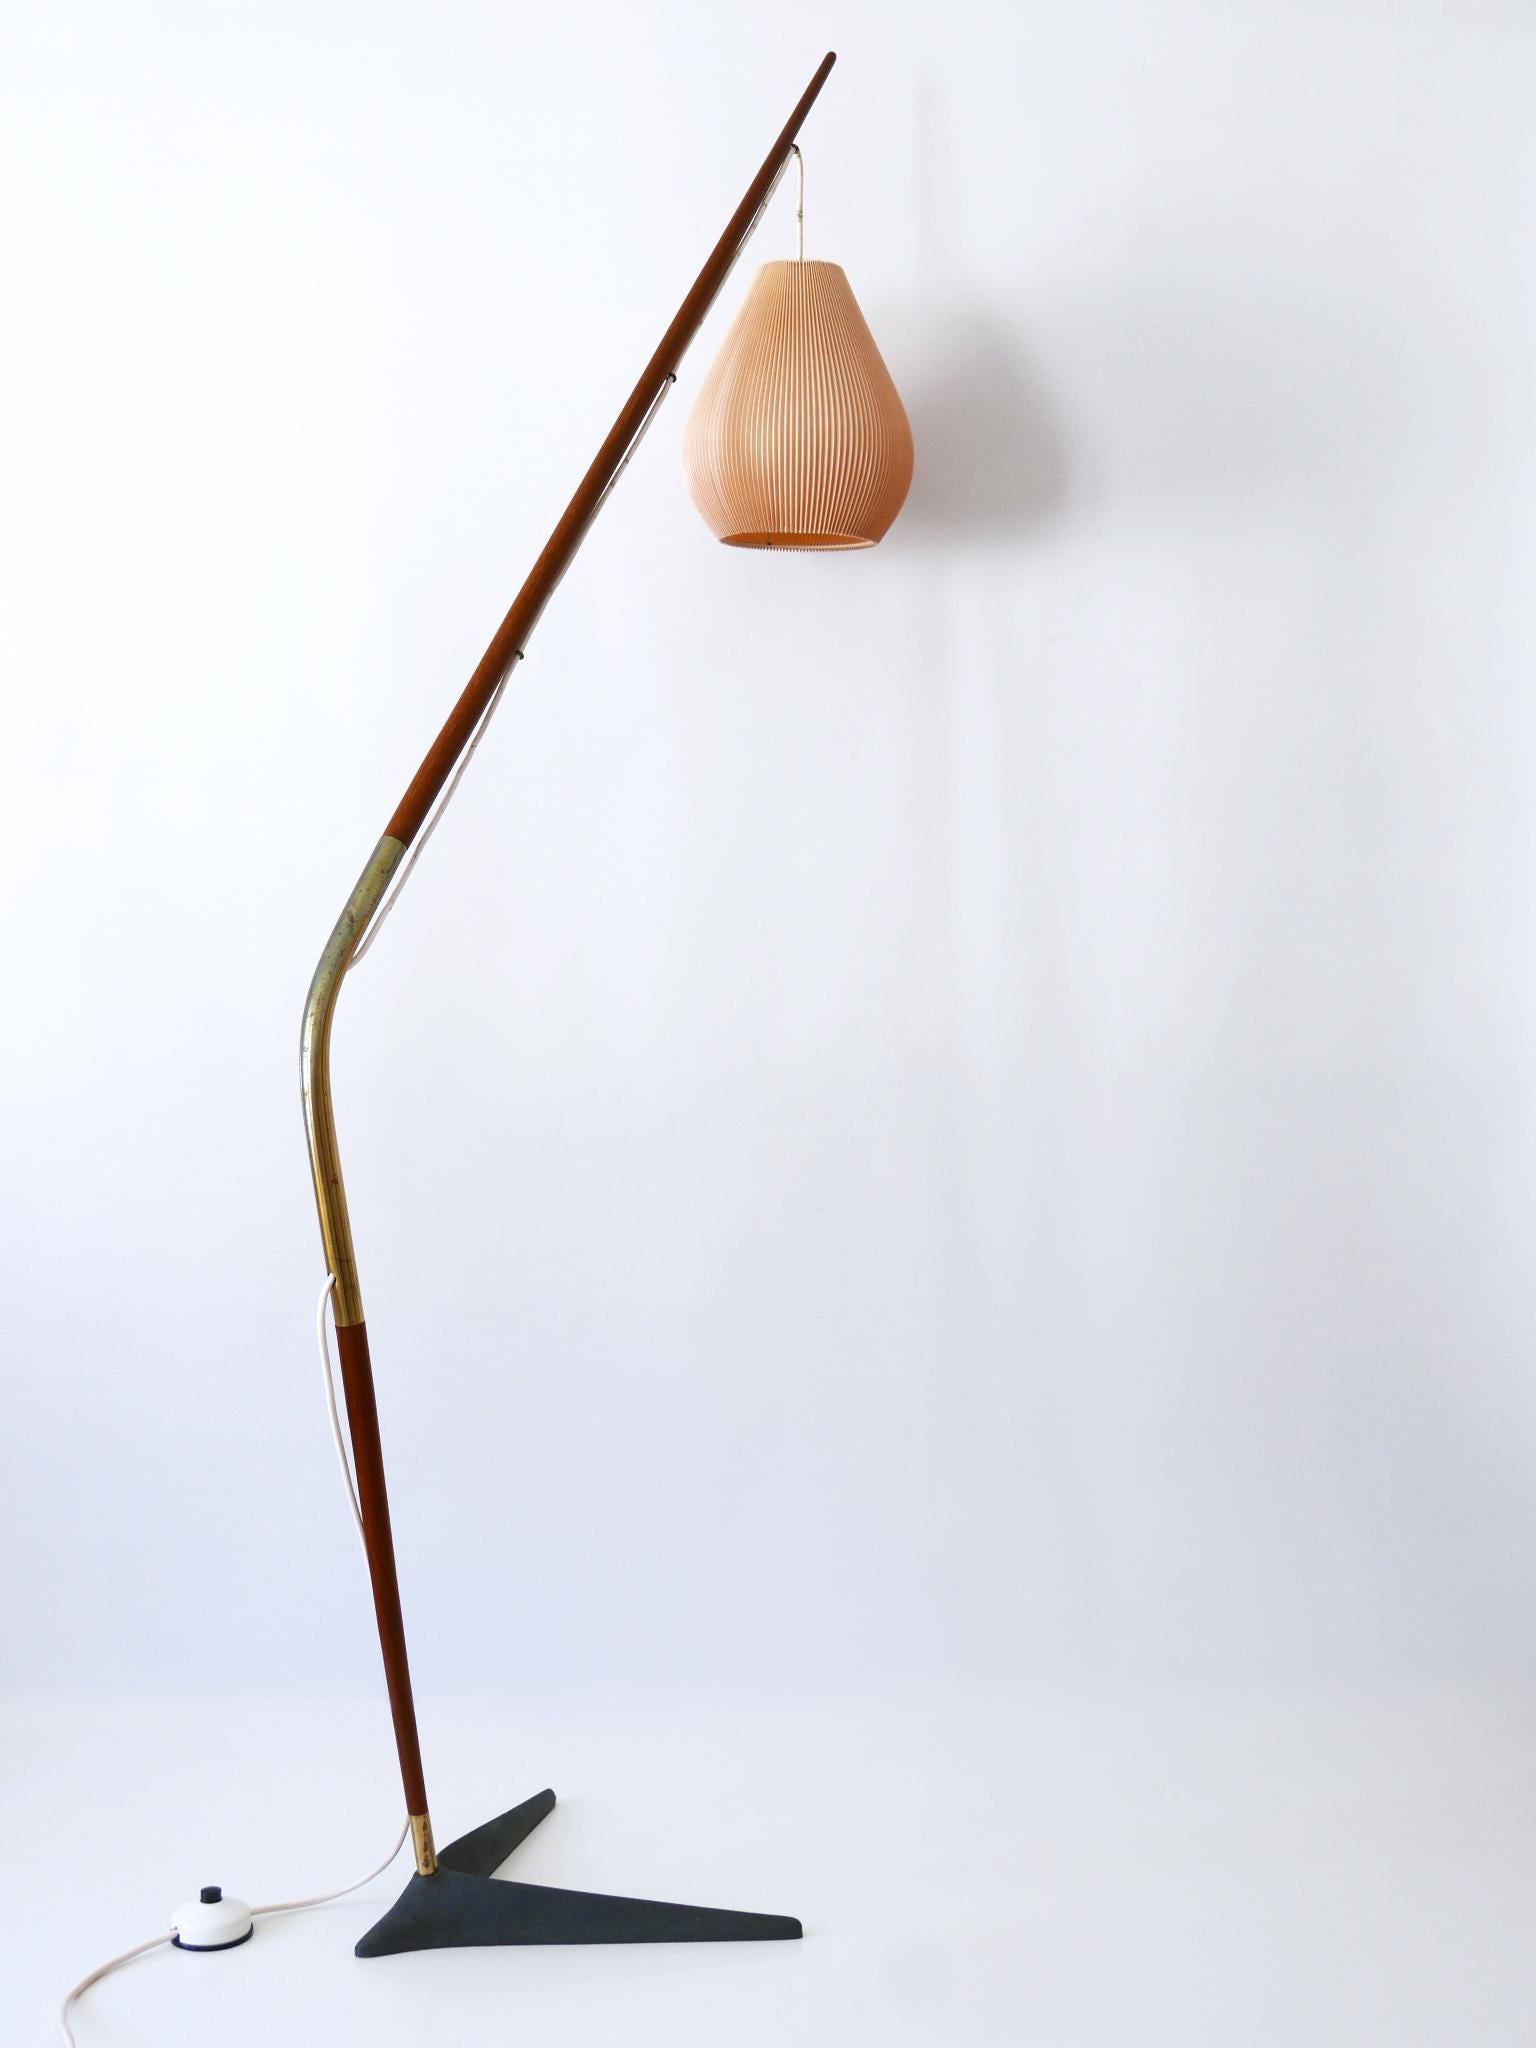 Brass Exceptional 'Fishing Pole' Floor Lamp by Svend Aage Holm Sørensen Denmark 1950s For Sale